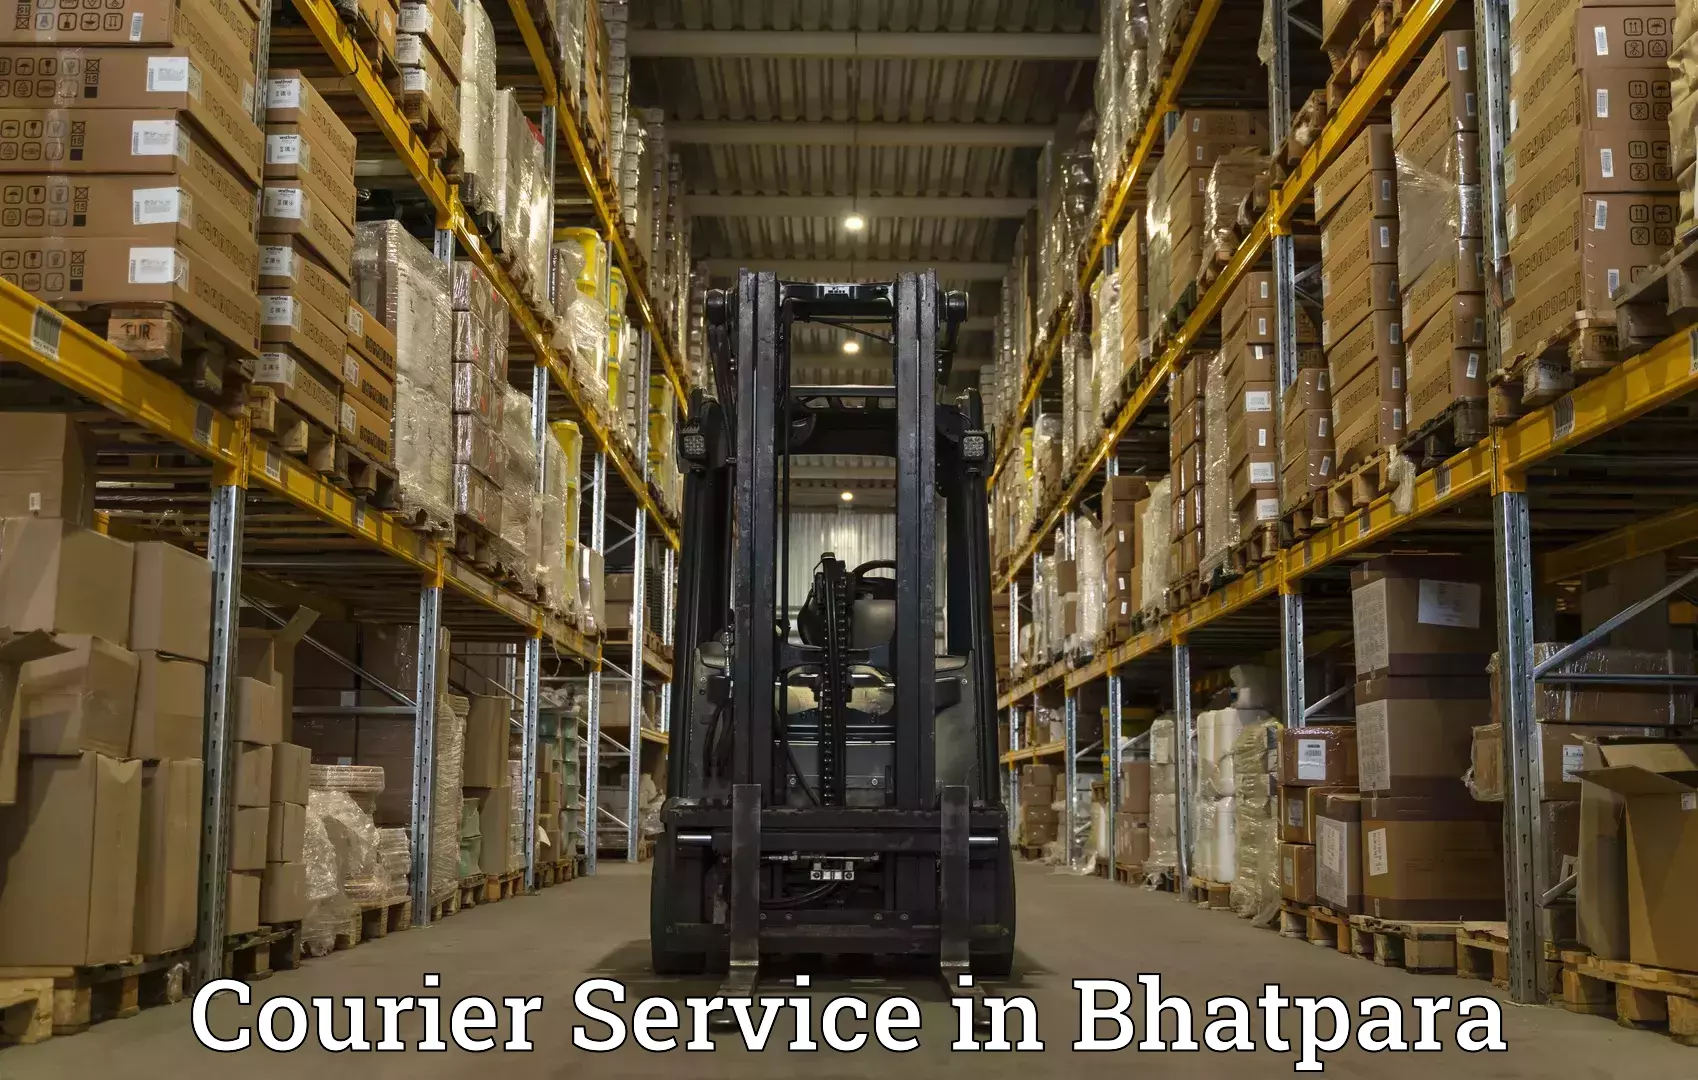 Dynamic courier operations in Bhatpara